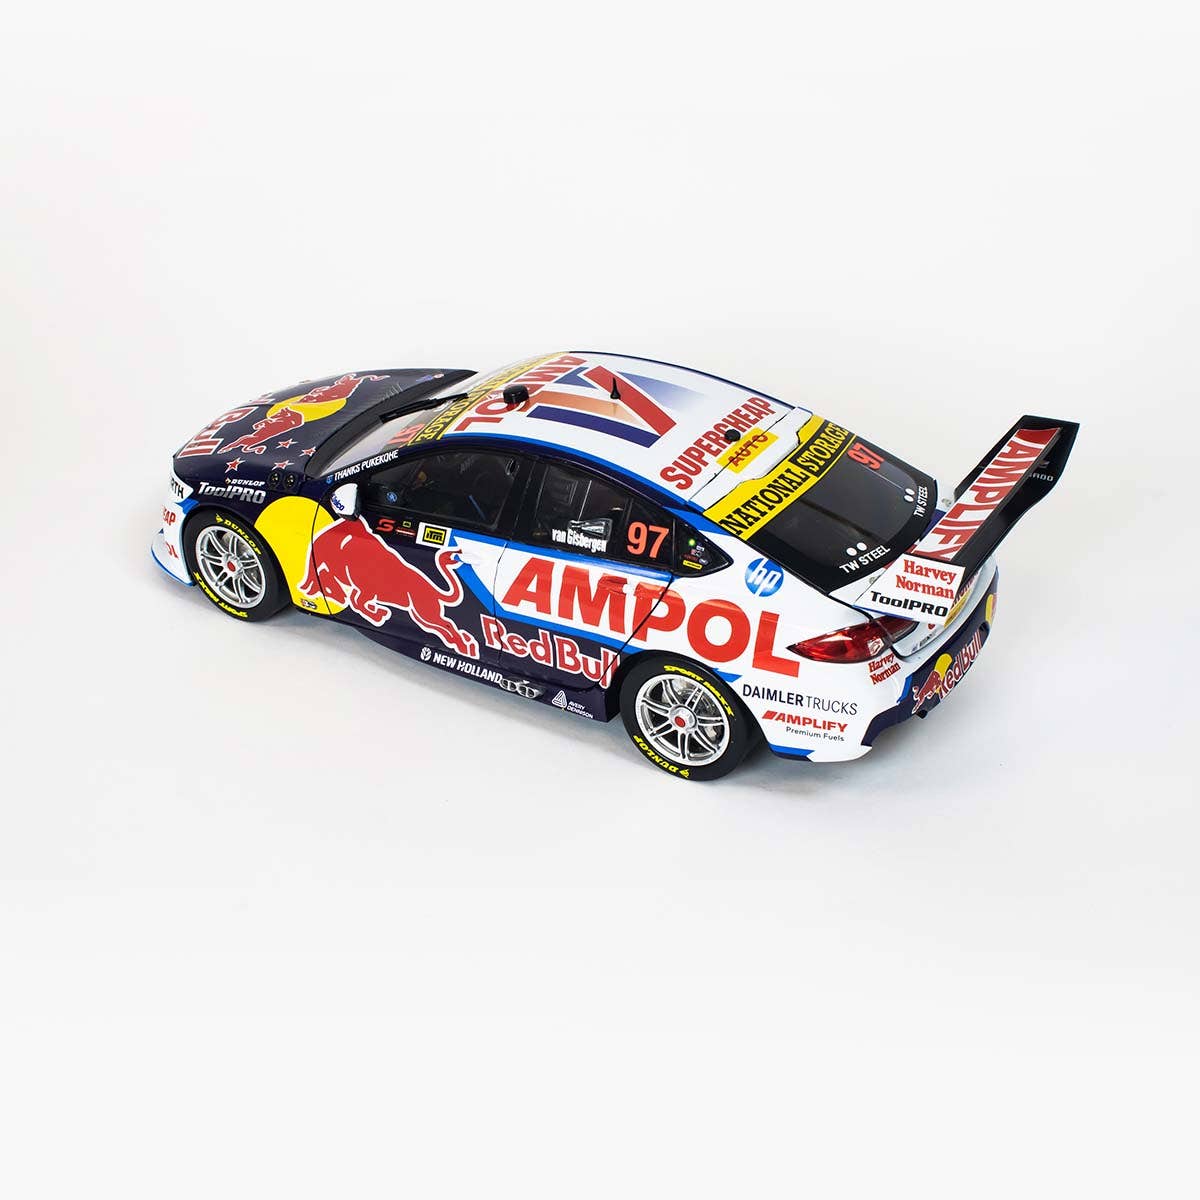 HOLDEN ZB COMMODORE - RED BULL AMPOL RACING - VAN GISBERGEN #97 - 2022 ITM Auckland Supersprint (Last Race at Pukekohe) - 1:43 Scale Diecast Model Car